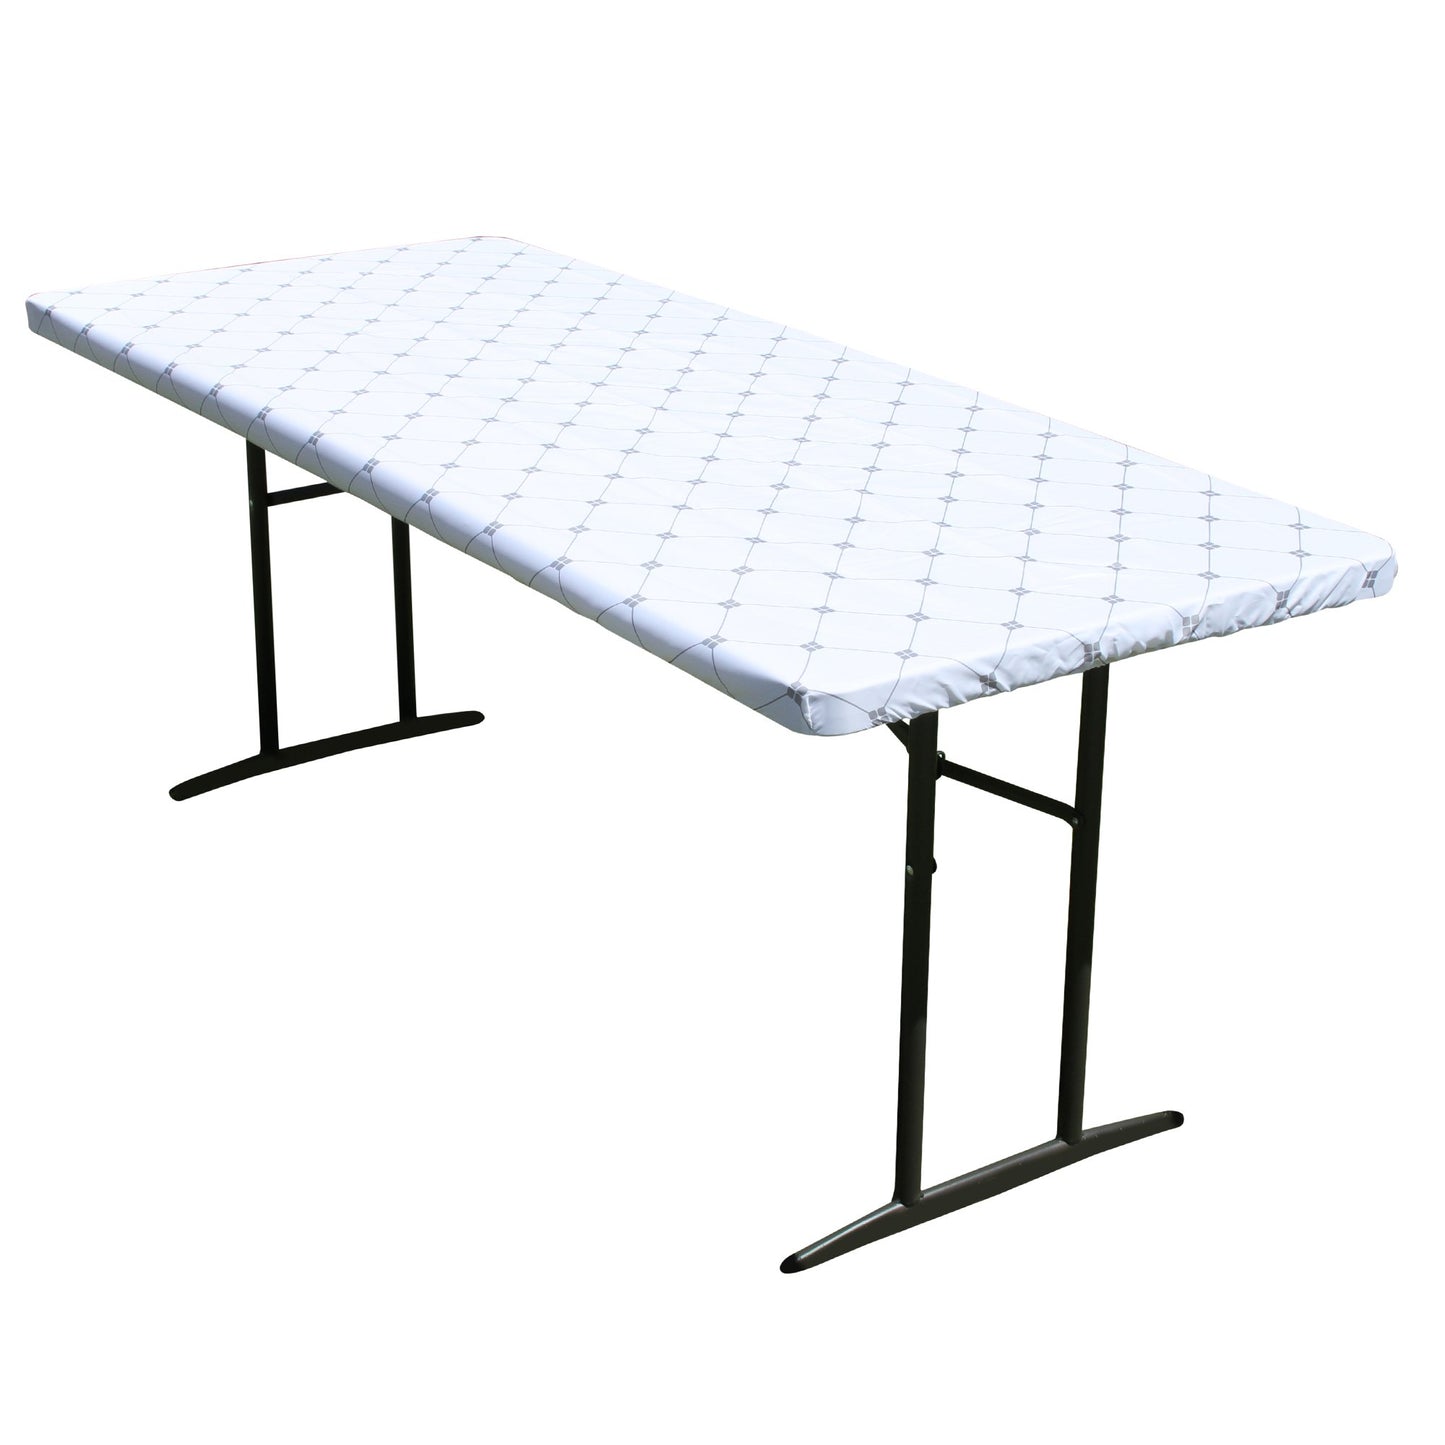 TableCloth PLUS 72" Diamonds Polyester Tablecloth for 6' Folding Tables displayed adorning a folding table